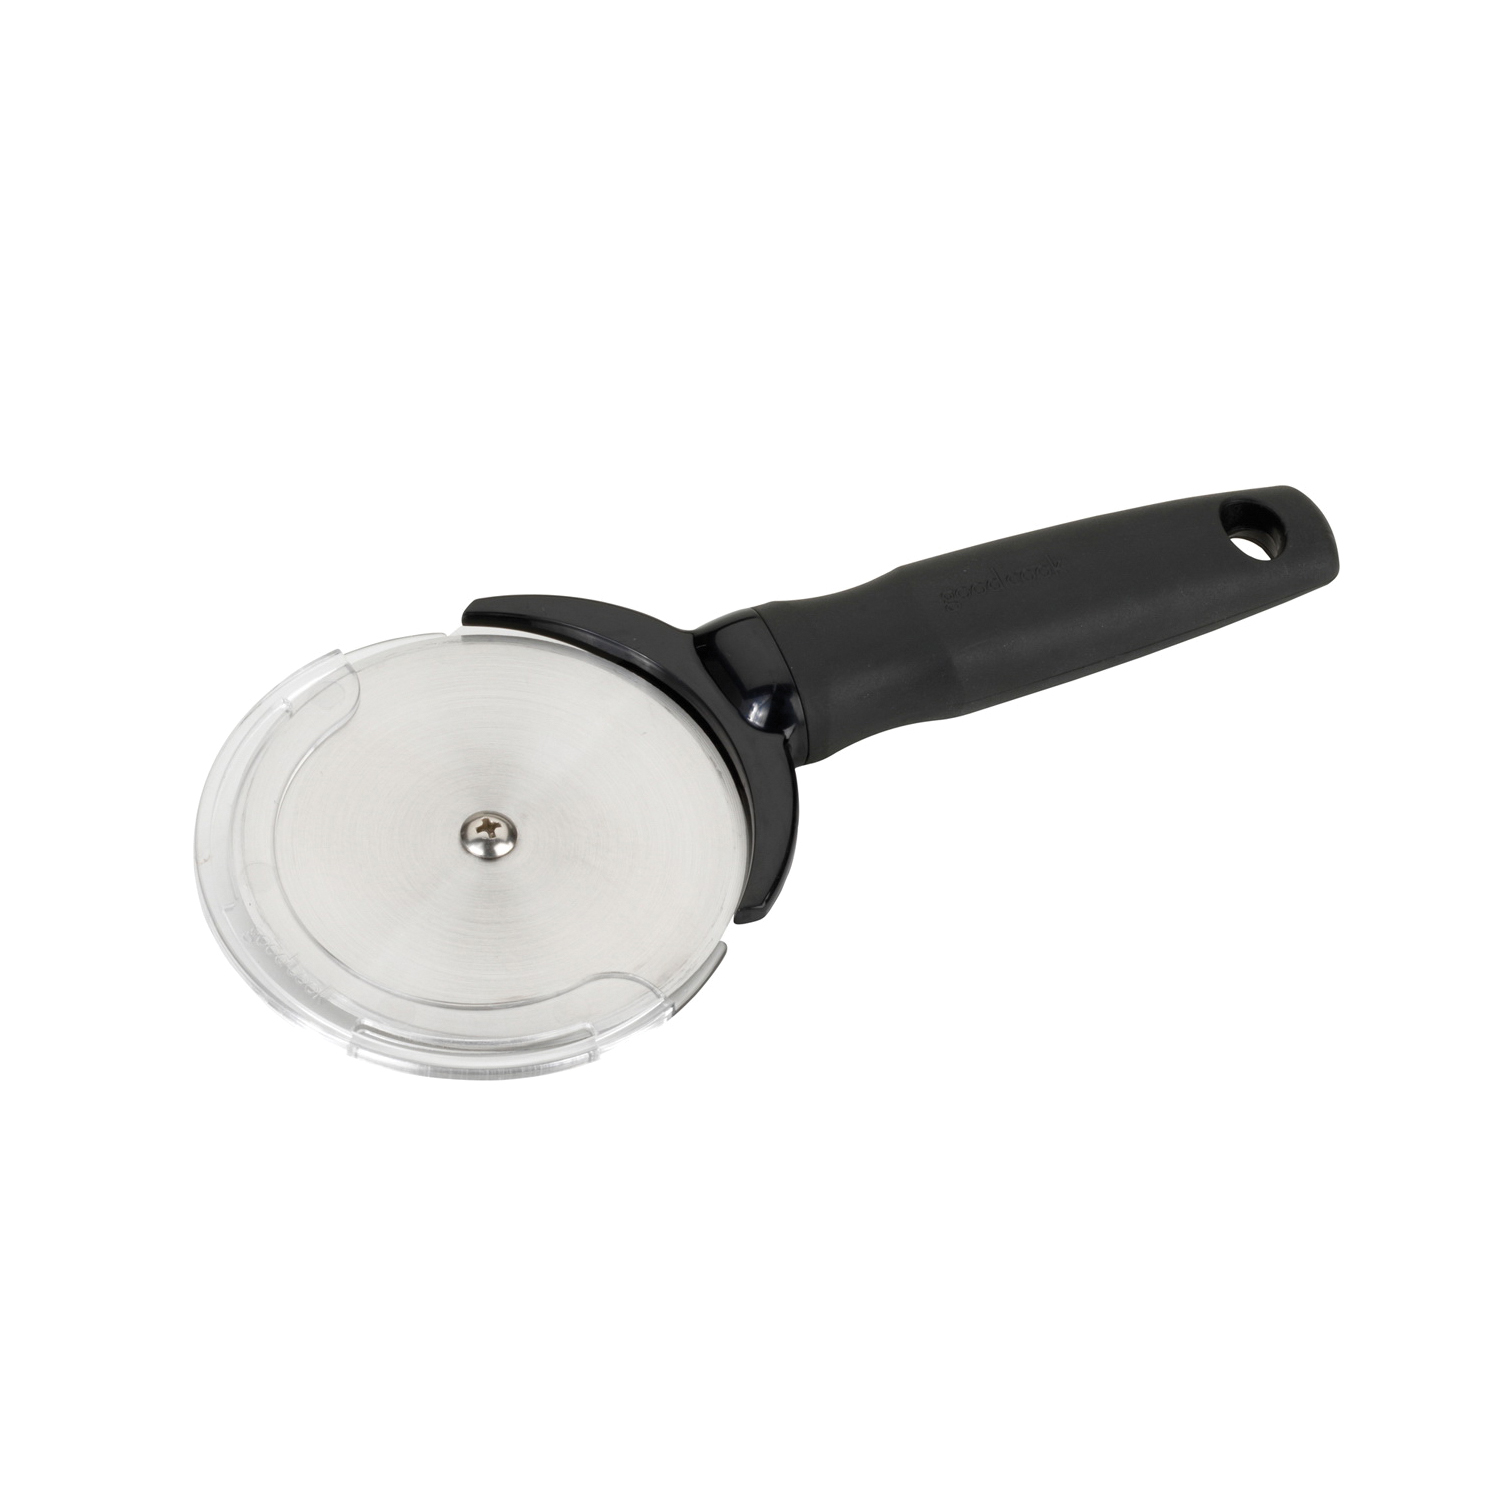 20358 Pizza Cutter, Stainless Steel Blade, Non-Slip, Soft Grip Handle